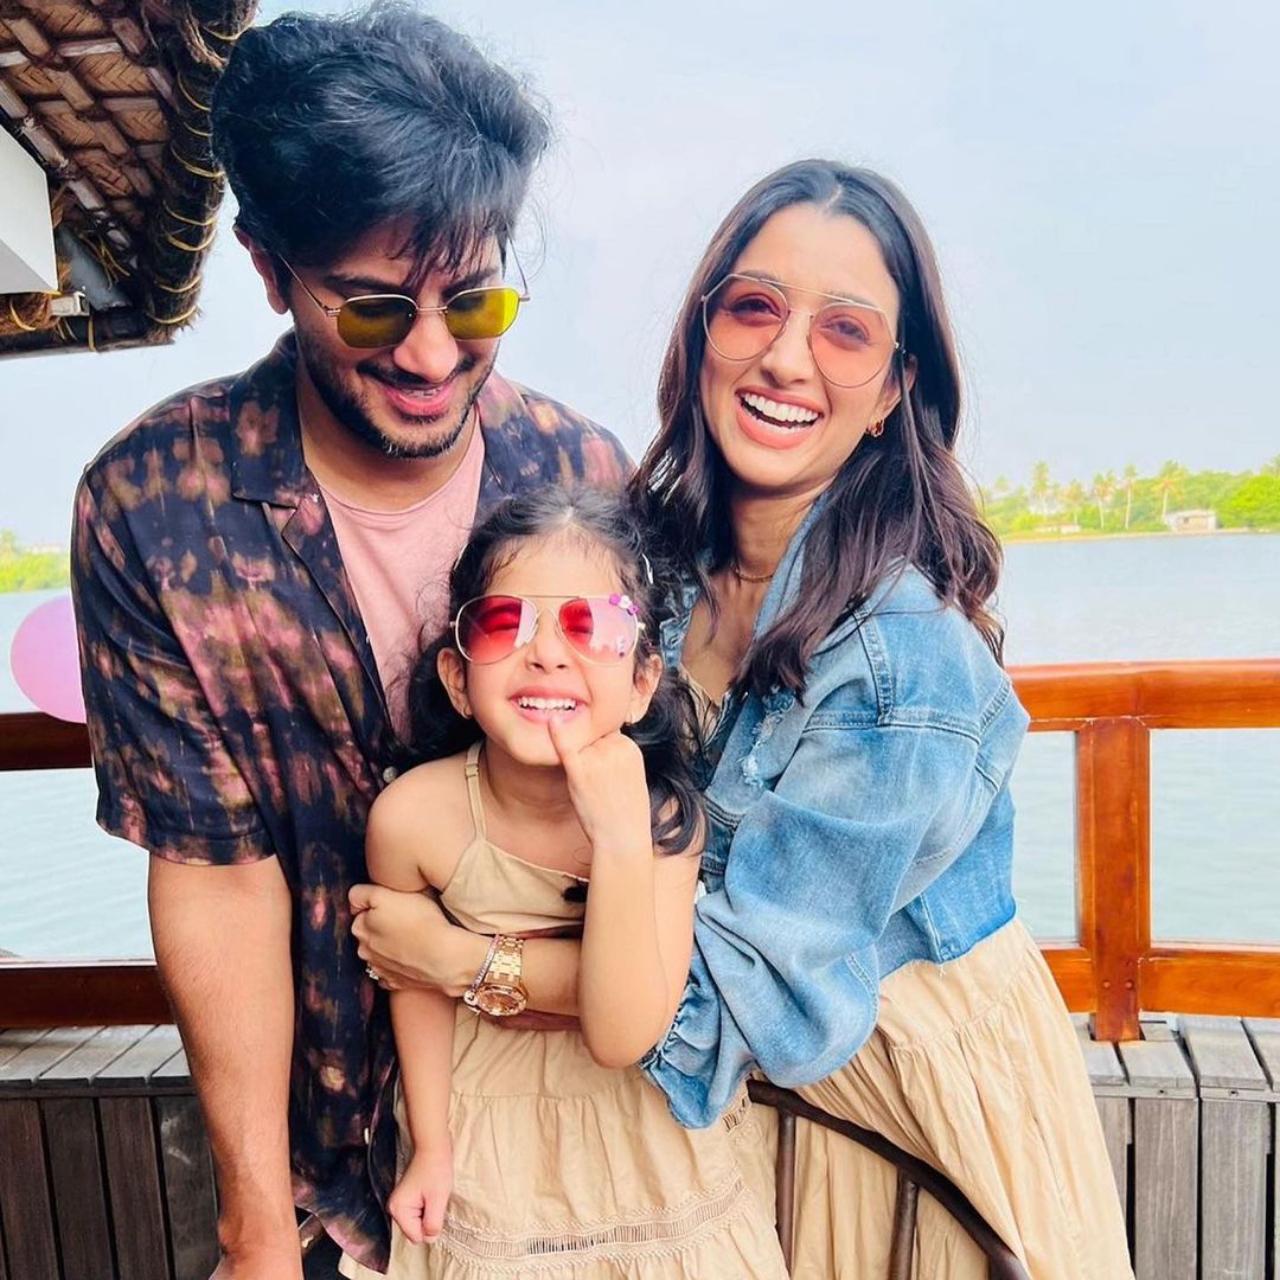 Malayalam film superstar Dulquer Salmaan adores his daughter and his posts for her are always filled with love and hope. The actor married Amal Sufiya in 2011 and they welcomed their daughter Maryam in 2017